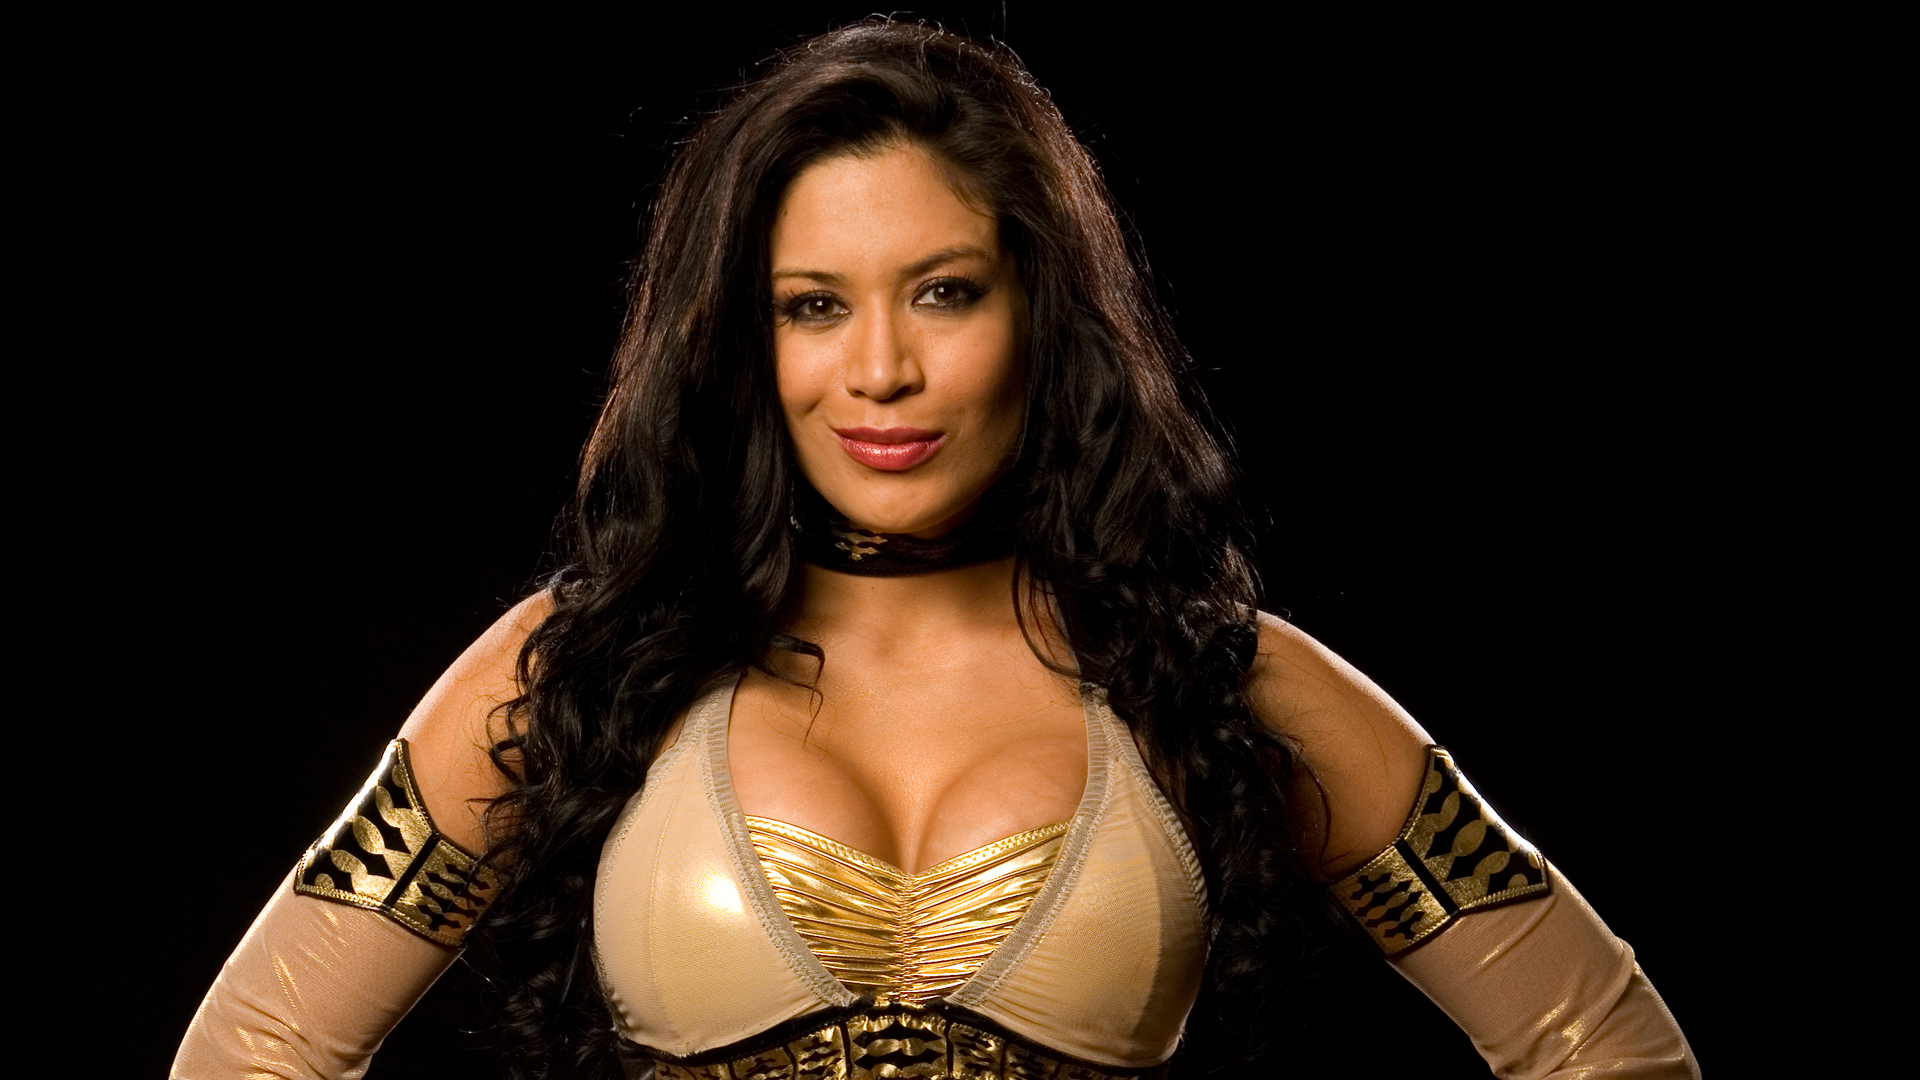 Wwe Divas Image Melina HD Wallpaper And Background Photos